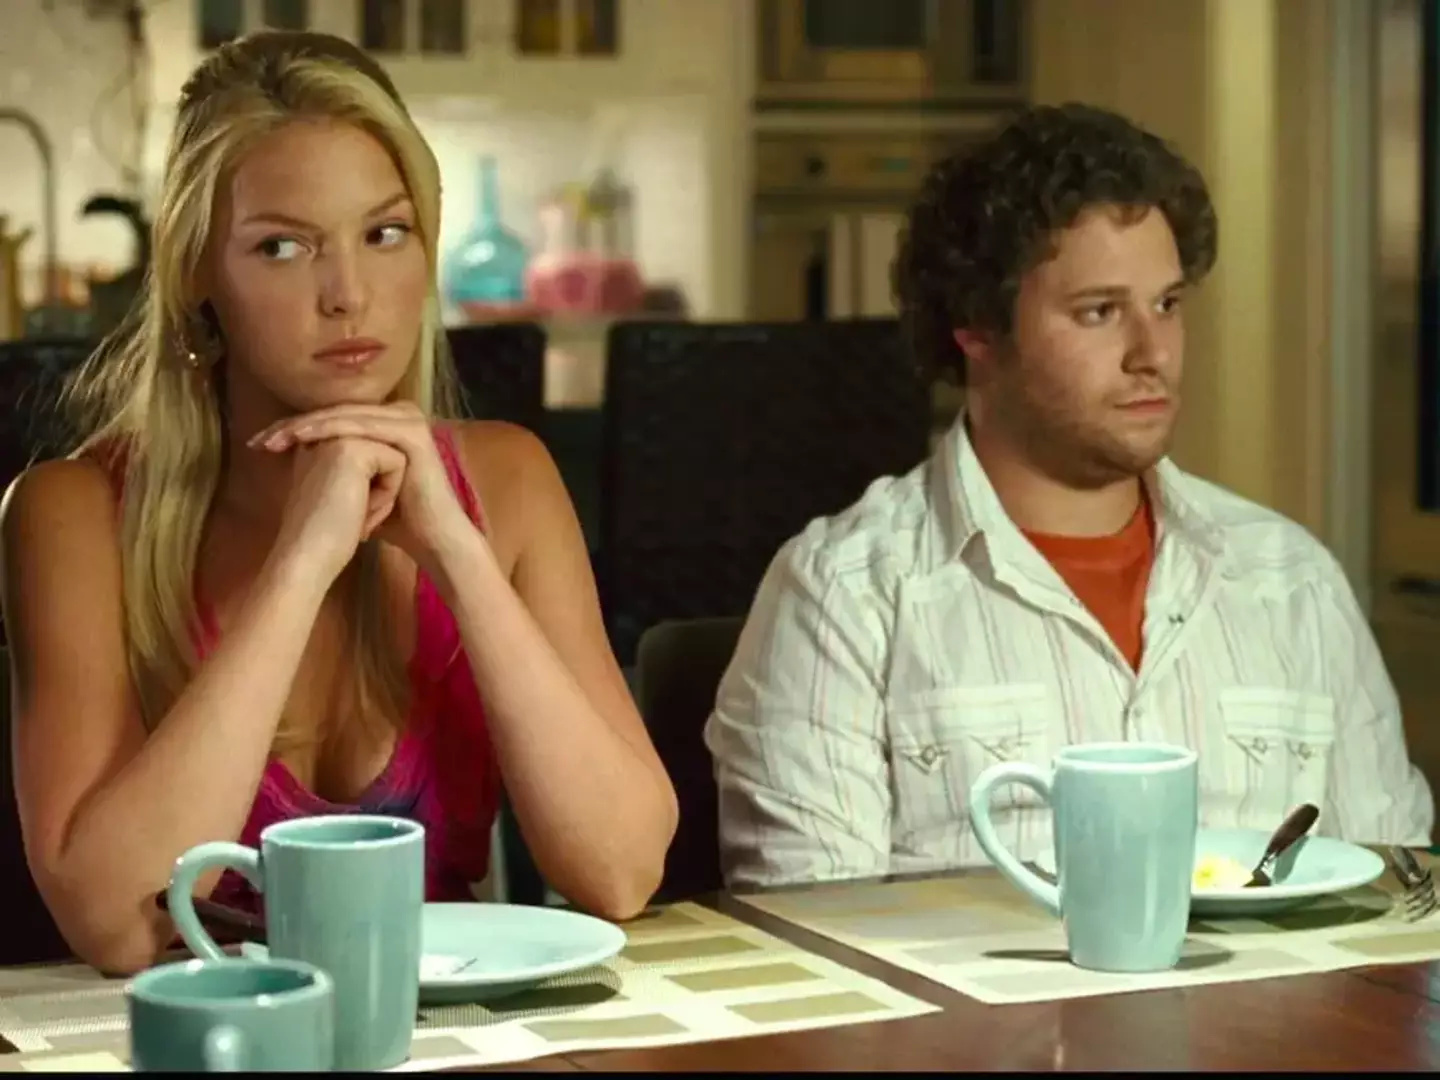 Katherine Heigl called Knocked Up 'a little sexist'.